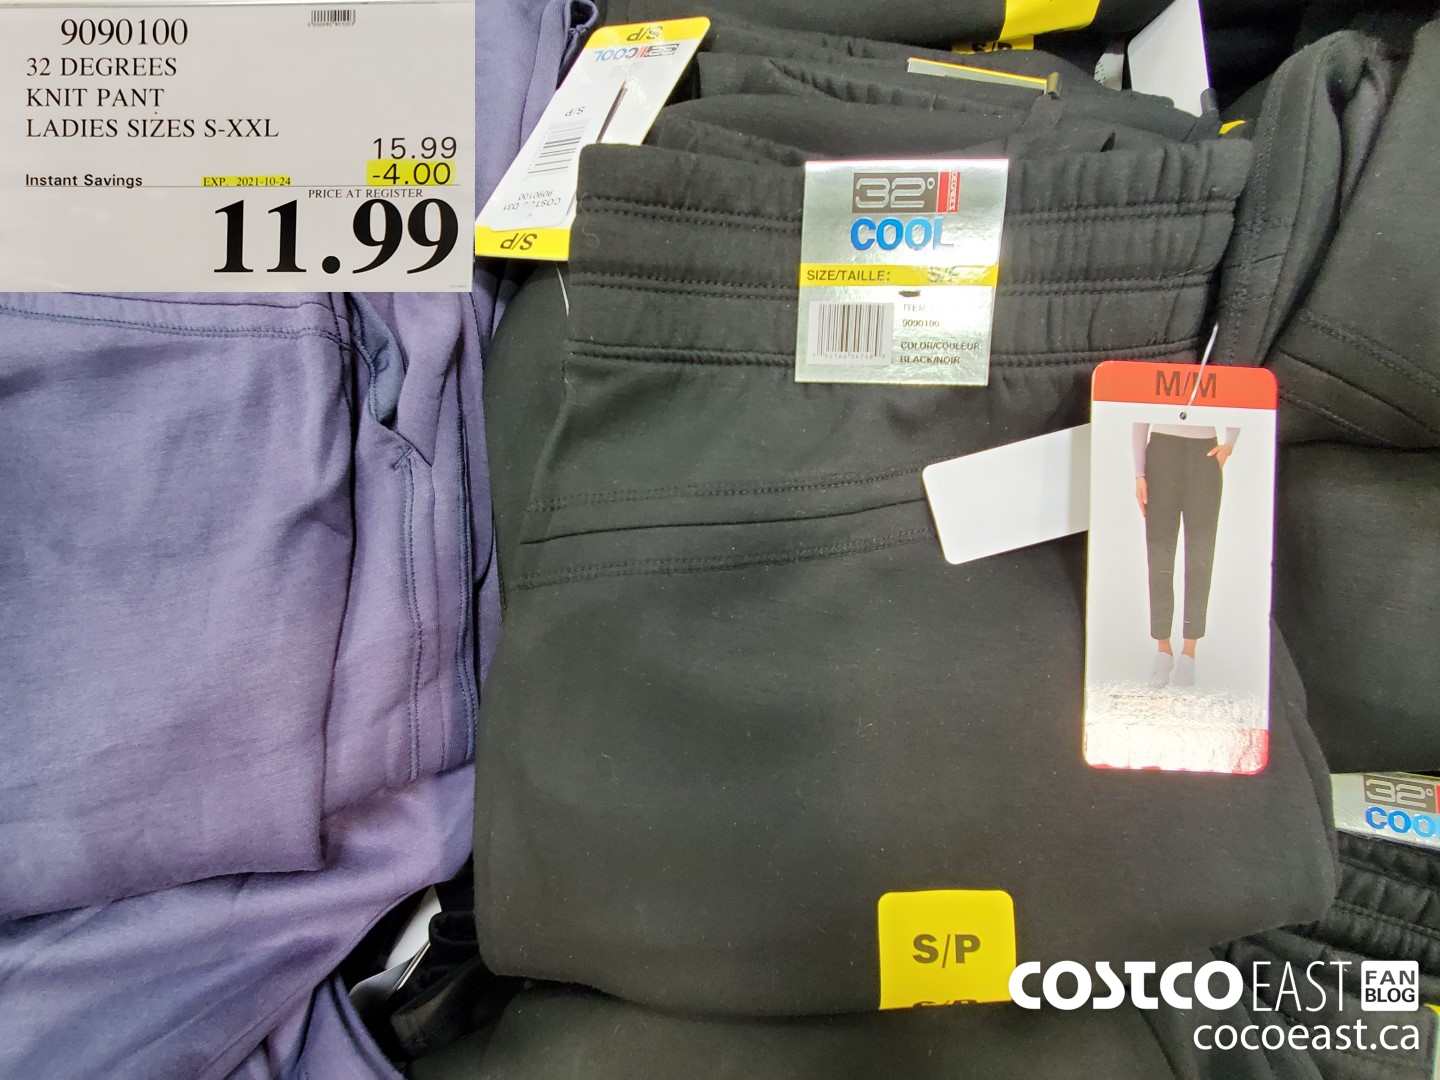 9090100 32 DEGREES KNIT PANT LADIES SIZES S XXL 4 00 INSTANT SAVINGS  EXPIRES ON 2021 10 24 11 99 - Costco East Fan Blog